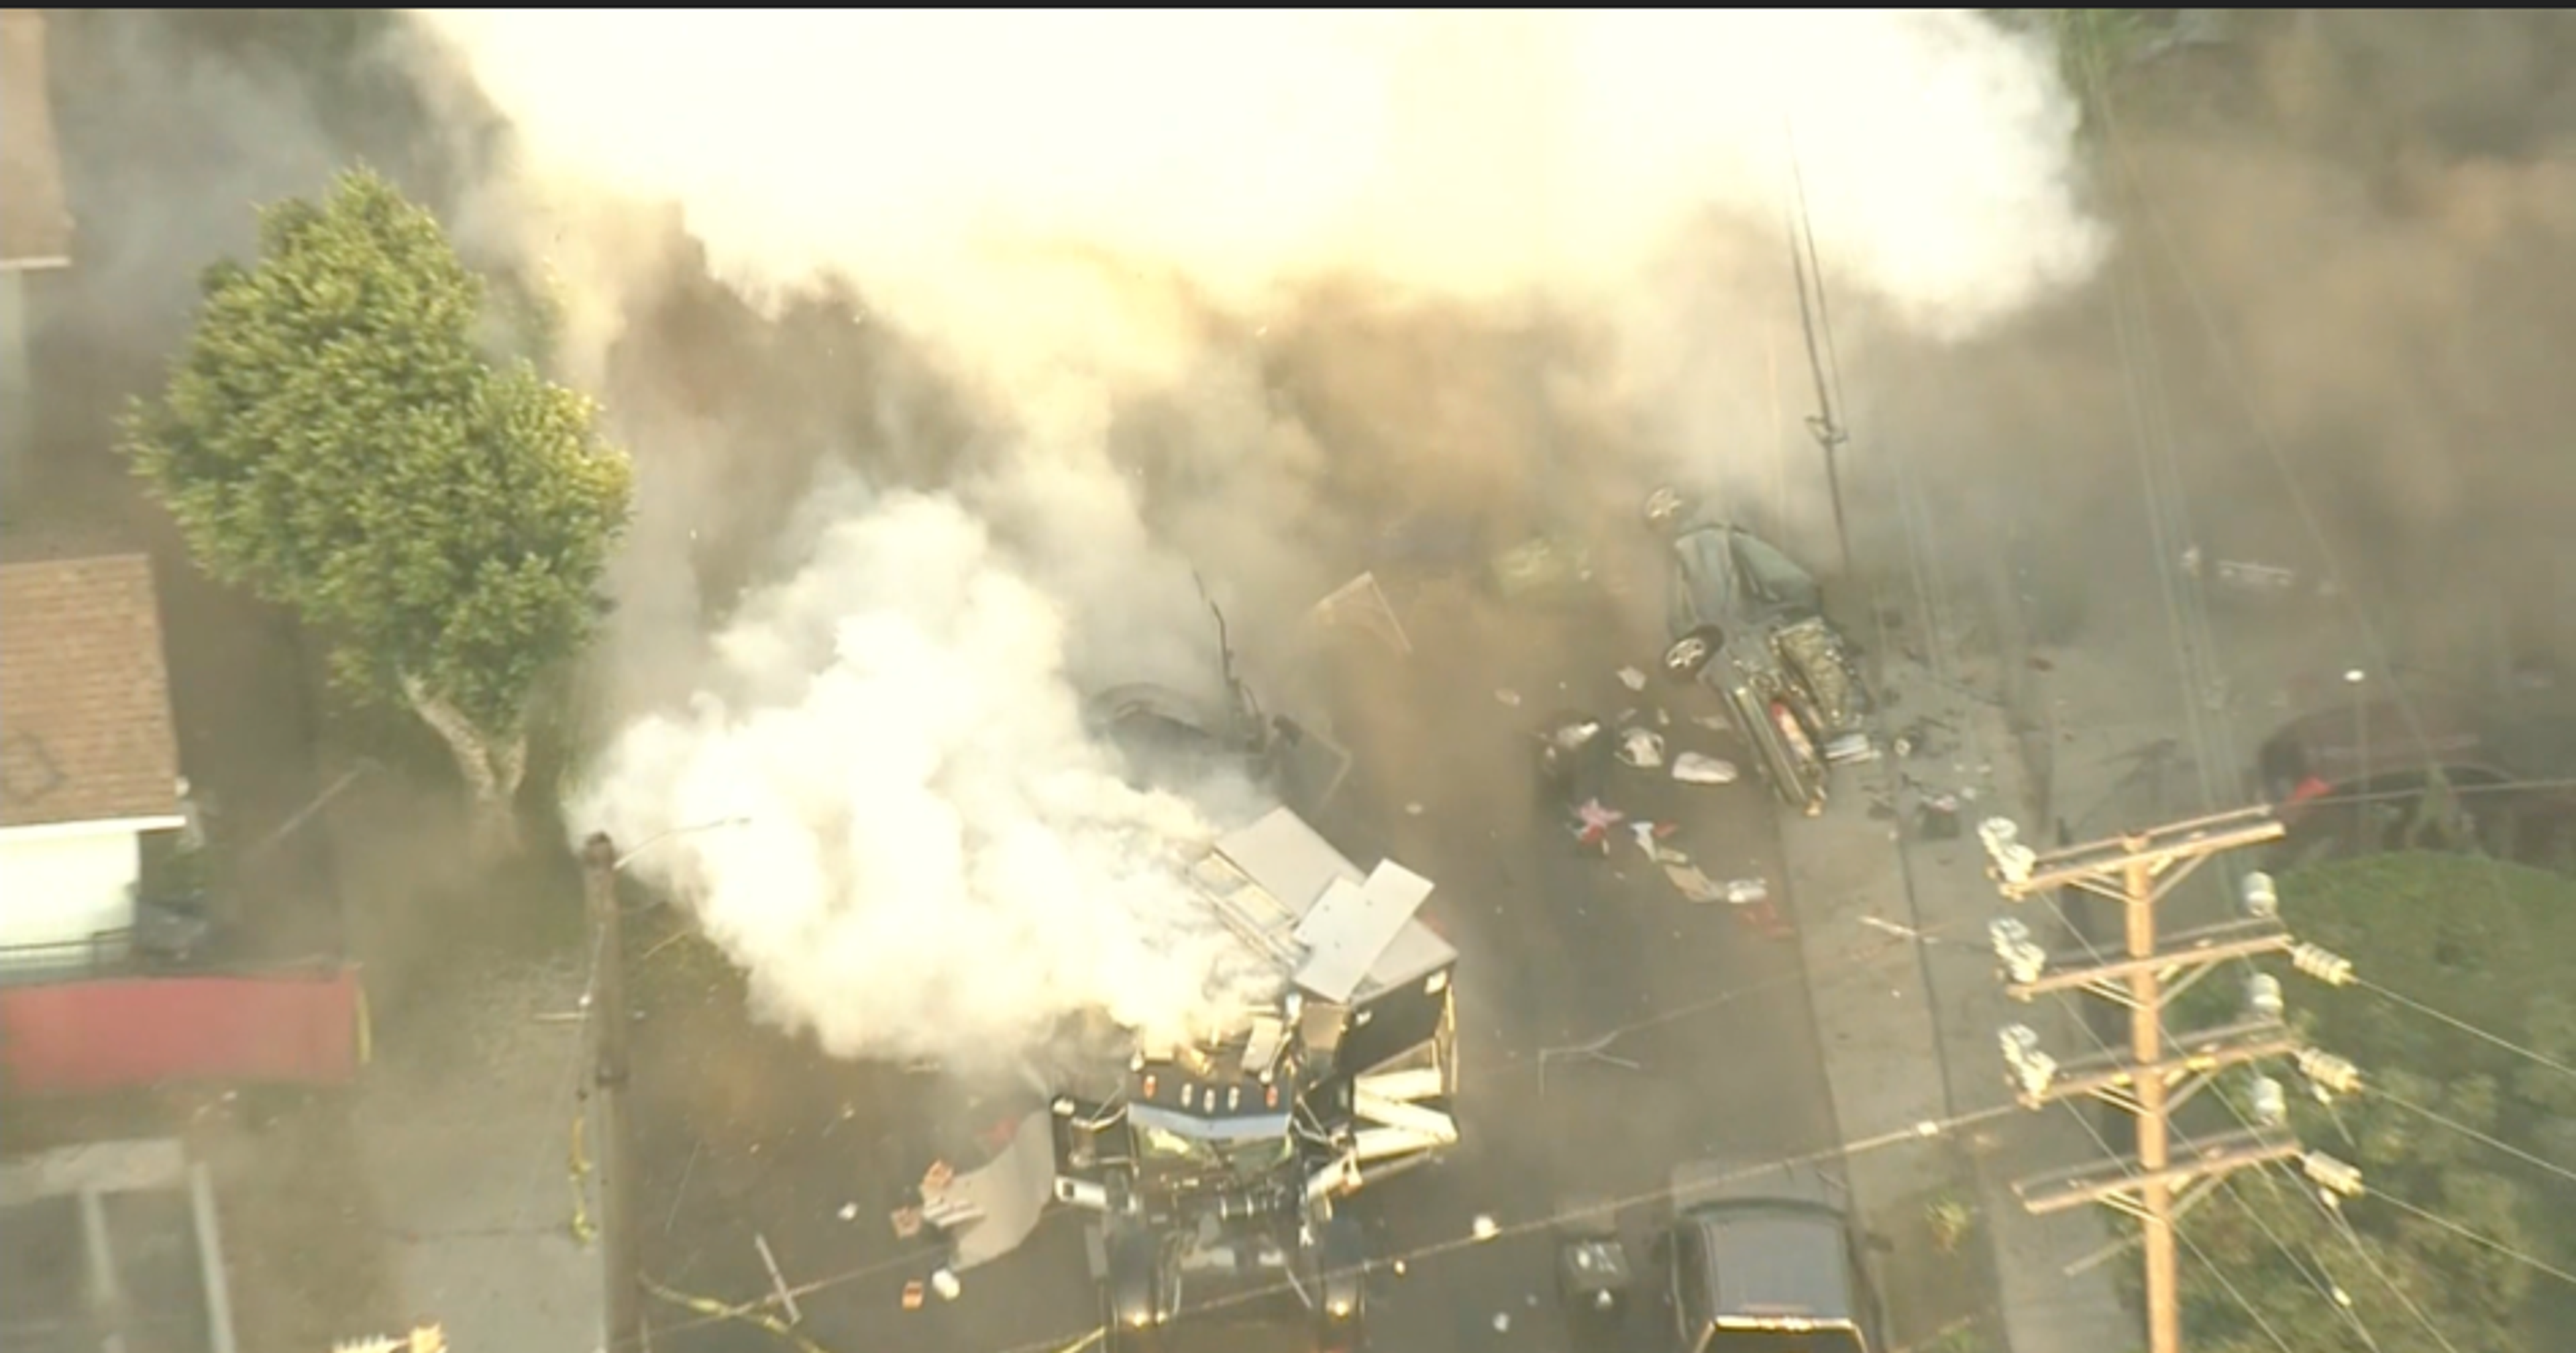 Overhead picture of LAPD fireworks explosion, courtesy CBS News. Shows the exploded containment vessel, an overturned car, a tree, power lines, and copious smoke obscuring the rest of the blast damage.